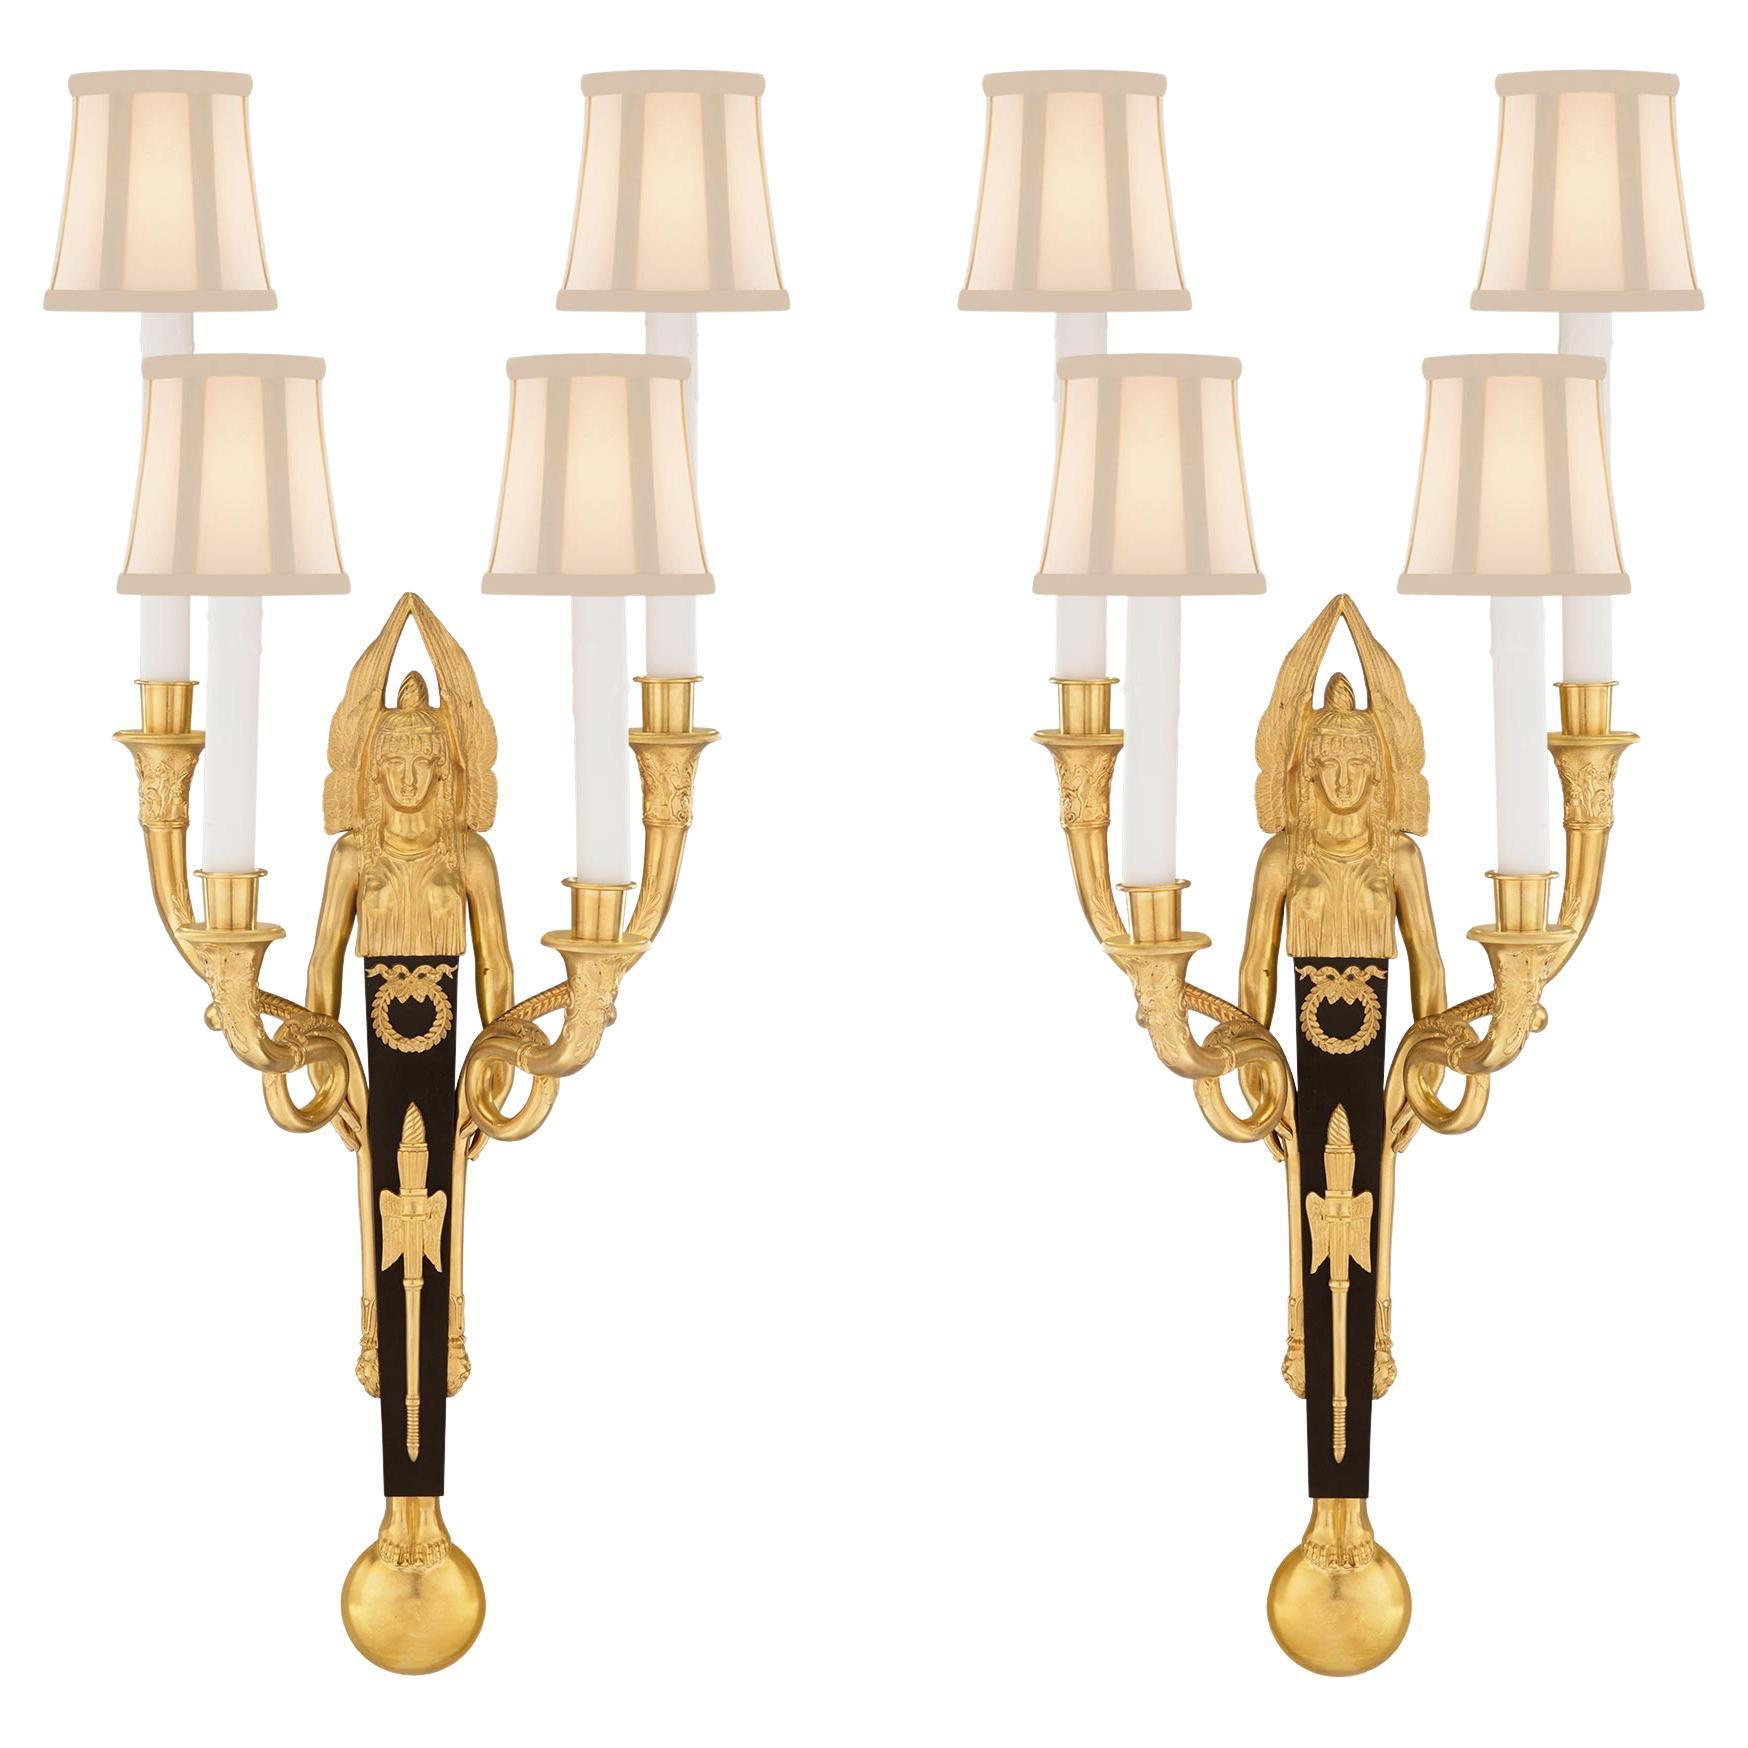 Pair of French 19th Century Neoclassical St. Bronze and Ormolu Sconces